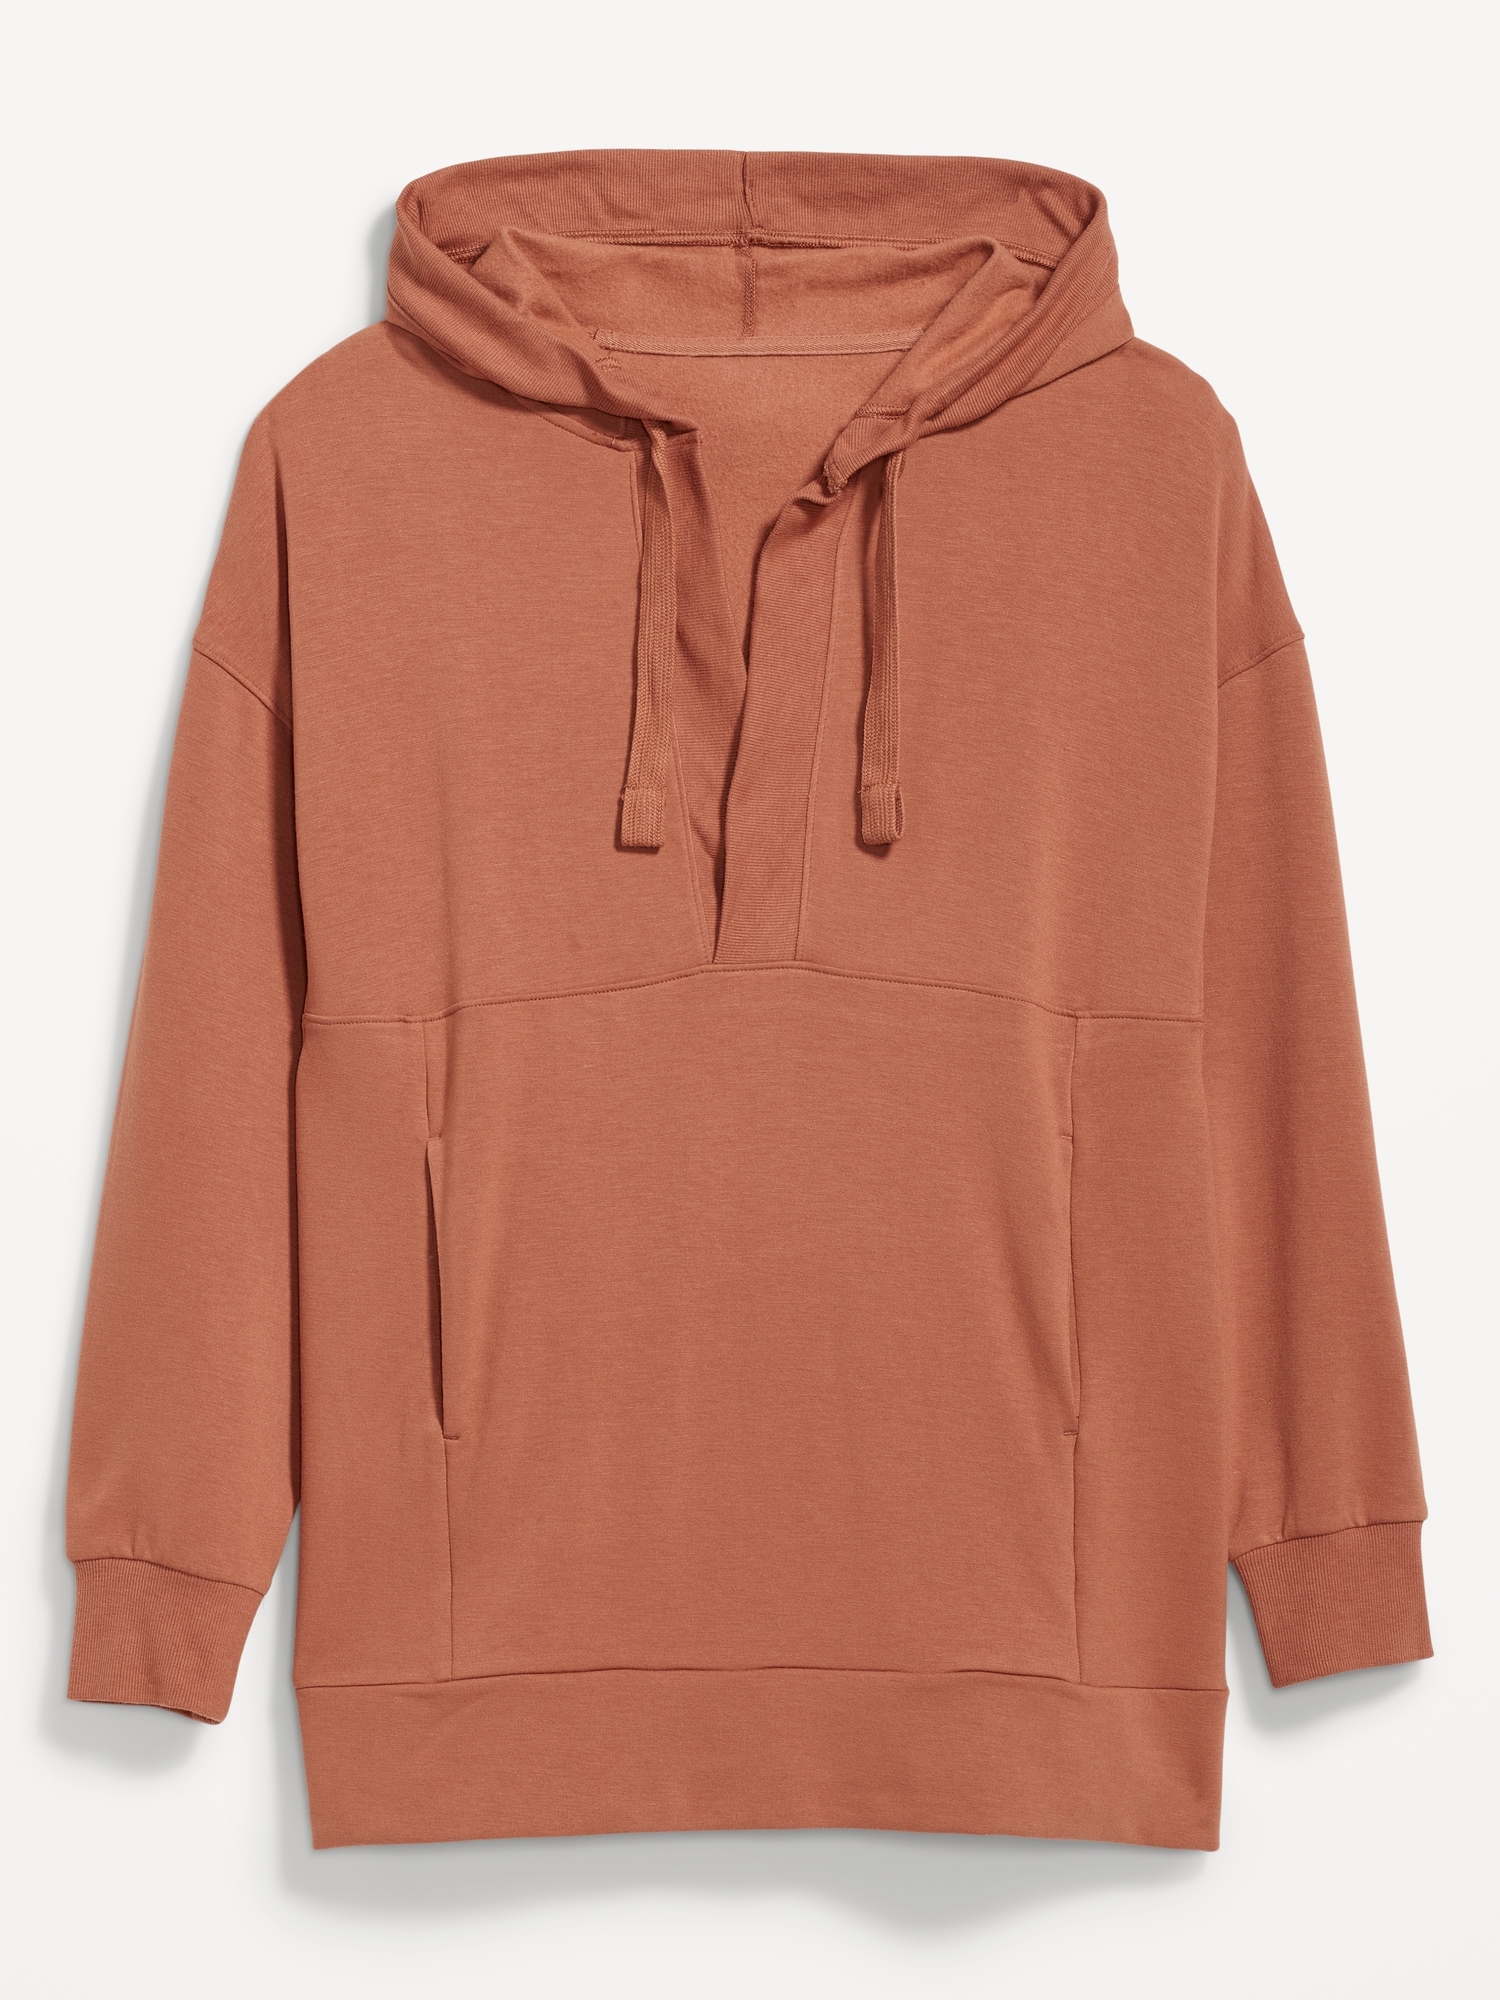 Oversized Live-In French-Terry Tunic Hoodie